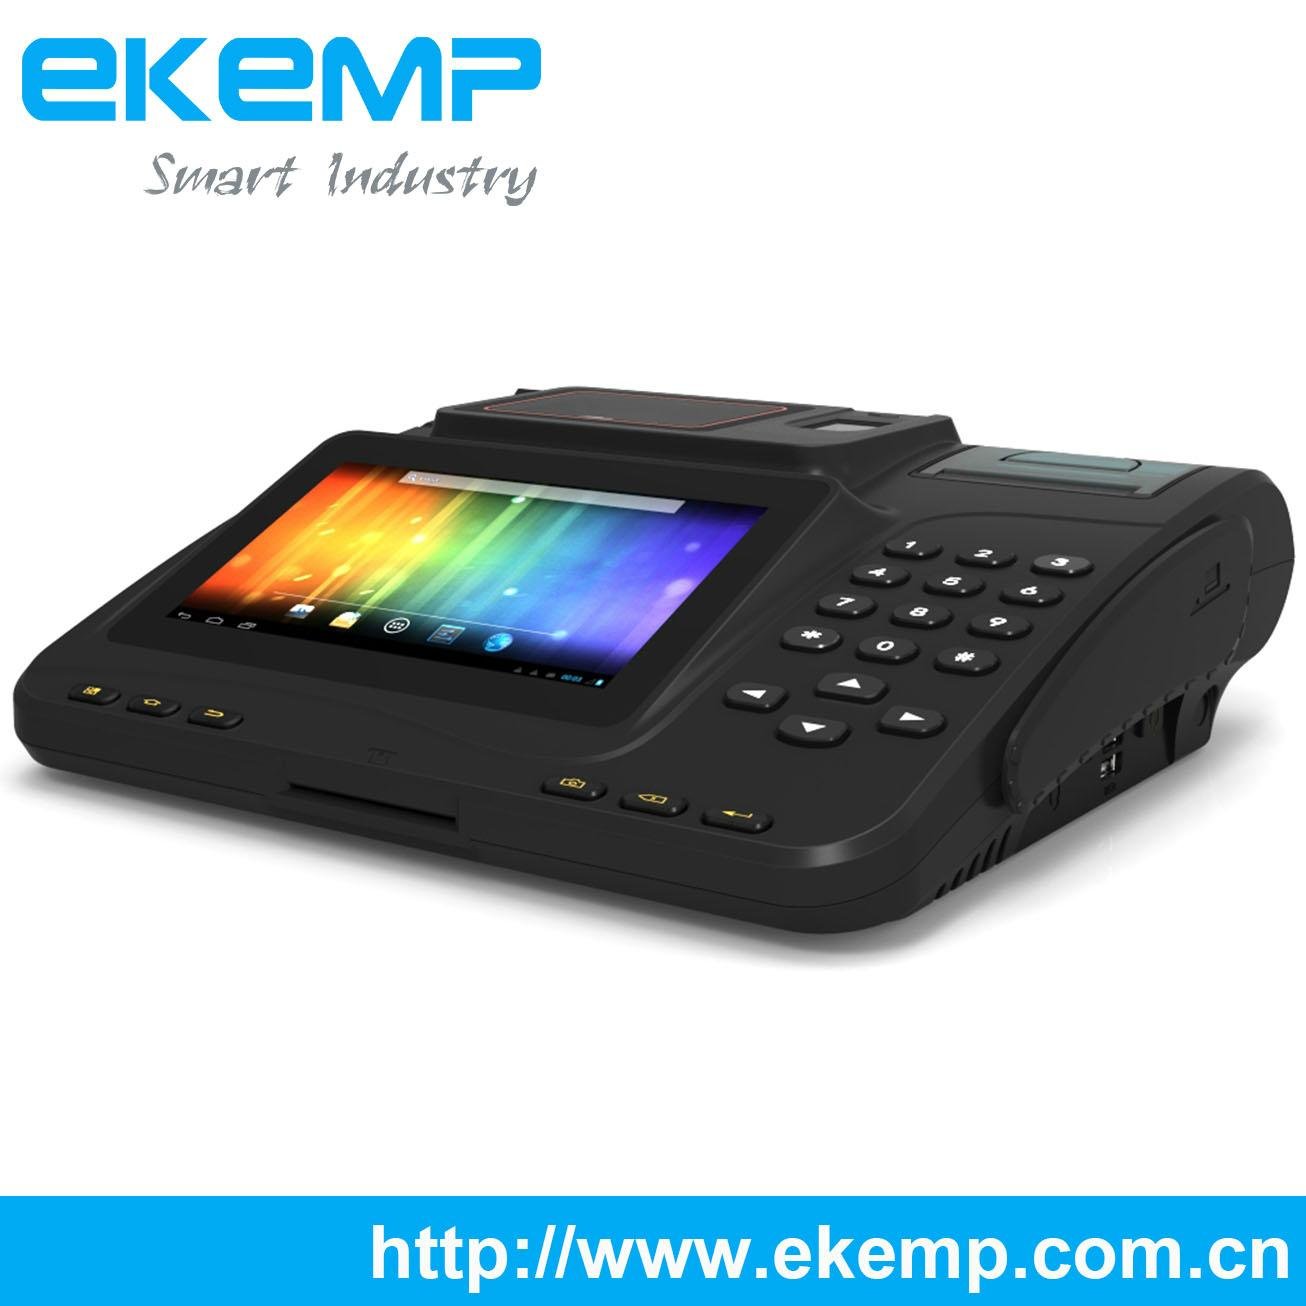 EKEMP Android All in One 7' Fingerprint Scan Tablet PC with RFID Card Reader 3